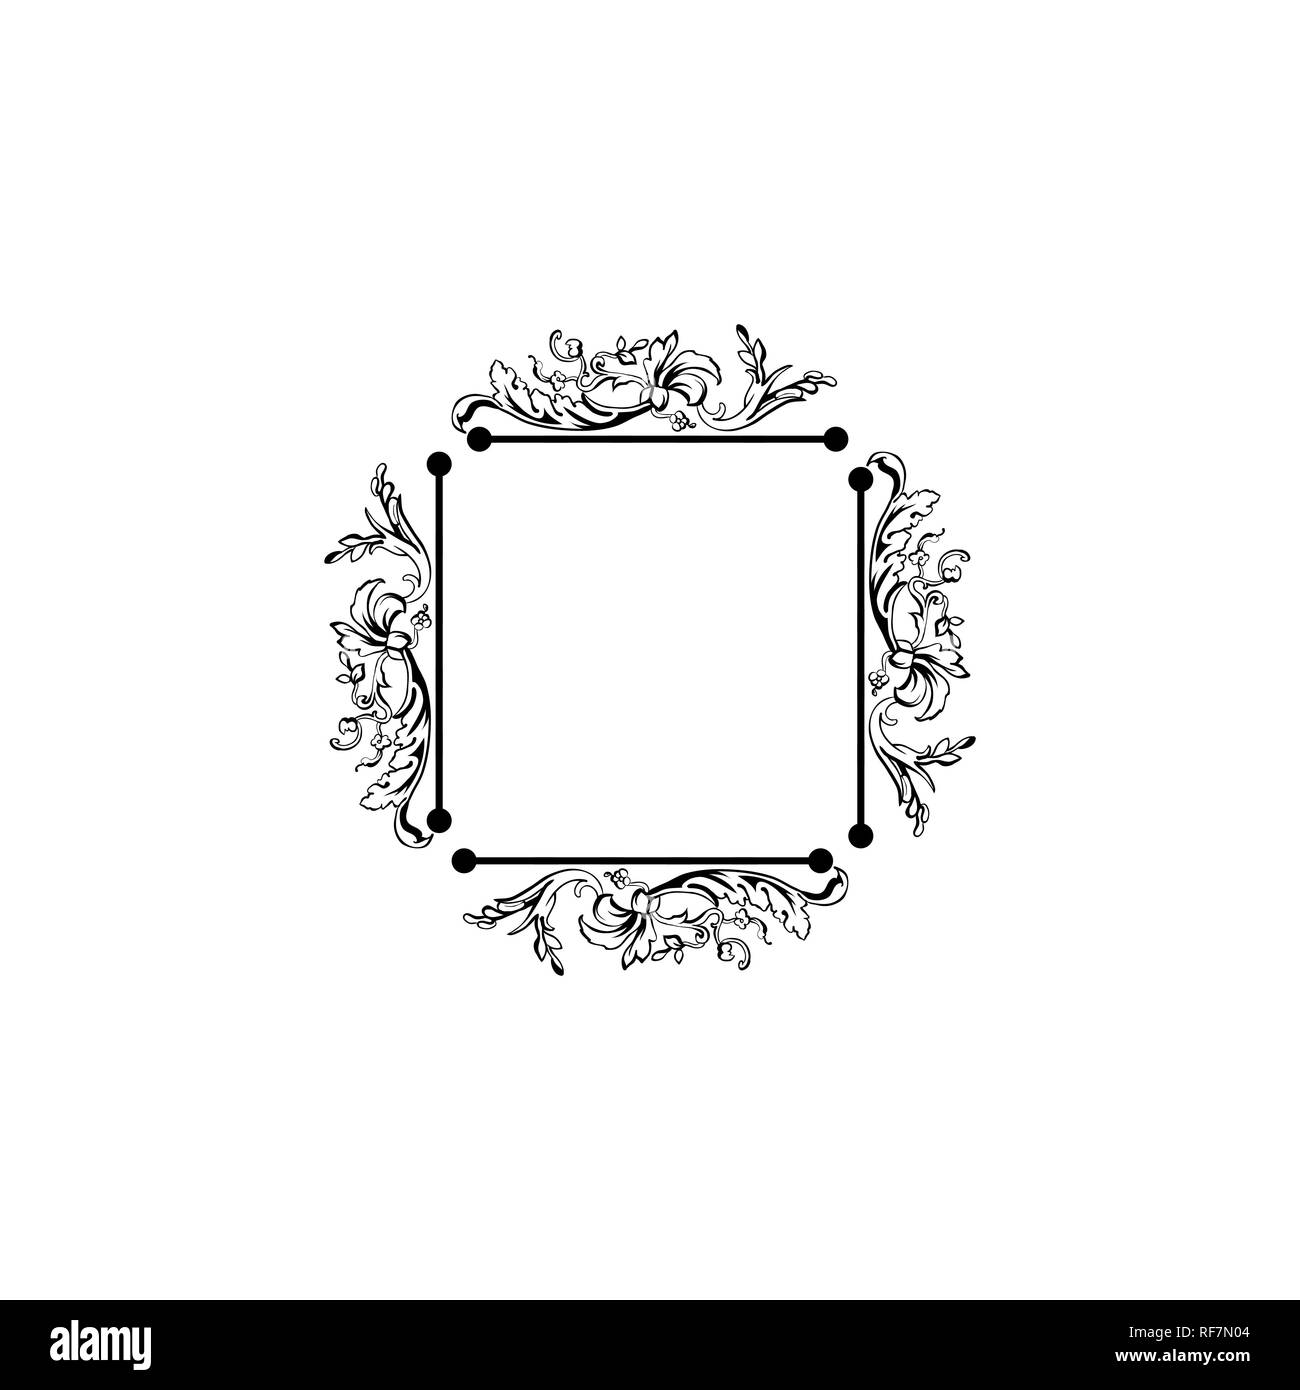 Floral vintage decorative vector frame. Flower black ink Square filigree border with text space. Isolated calligraphic frame with copyspace. Invitation, greeting card, poster flourish design element Stock Vector